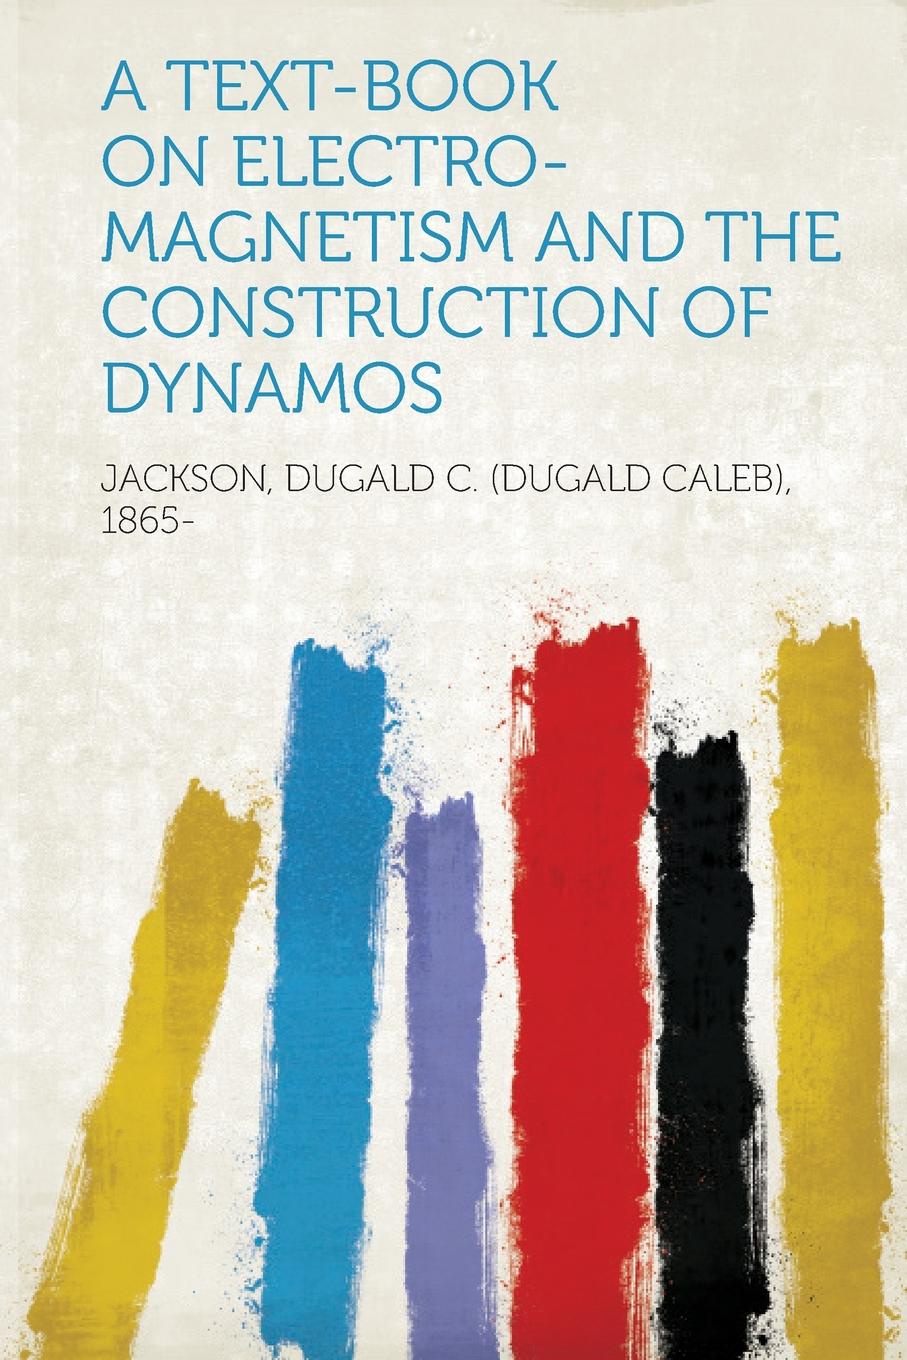 A Text-Book on Electro-Magnetism and the Construction of Dynamos